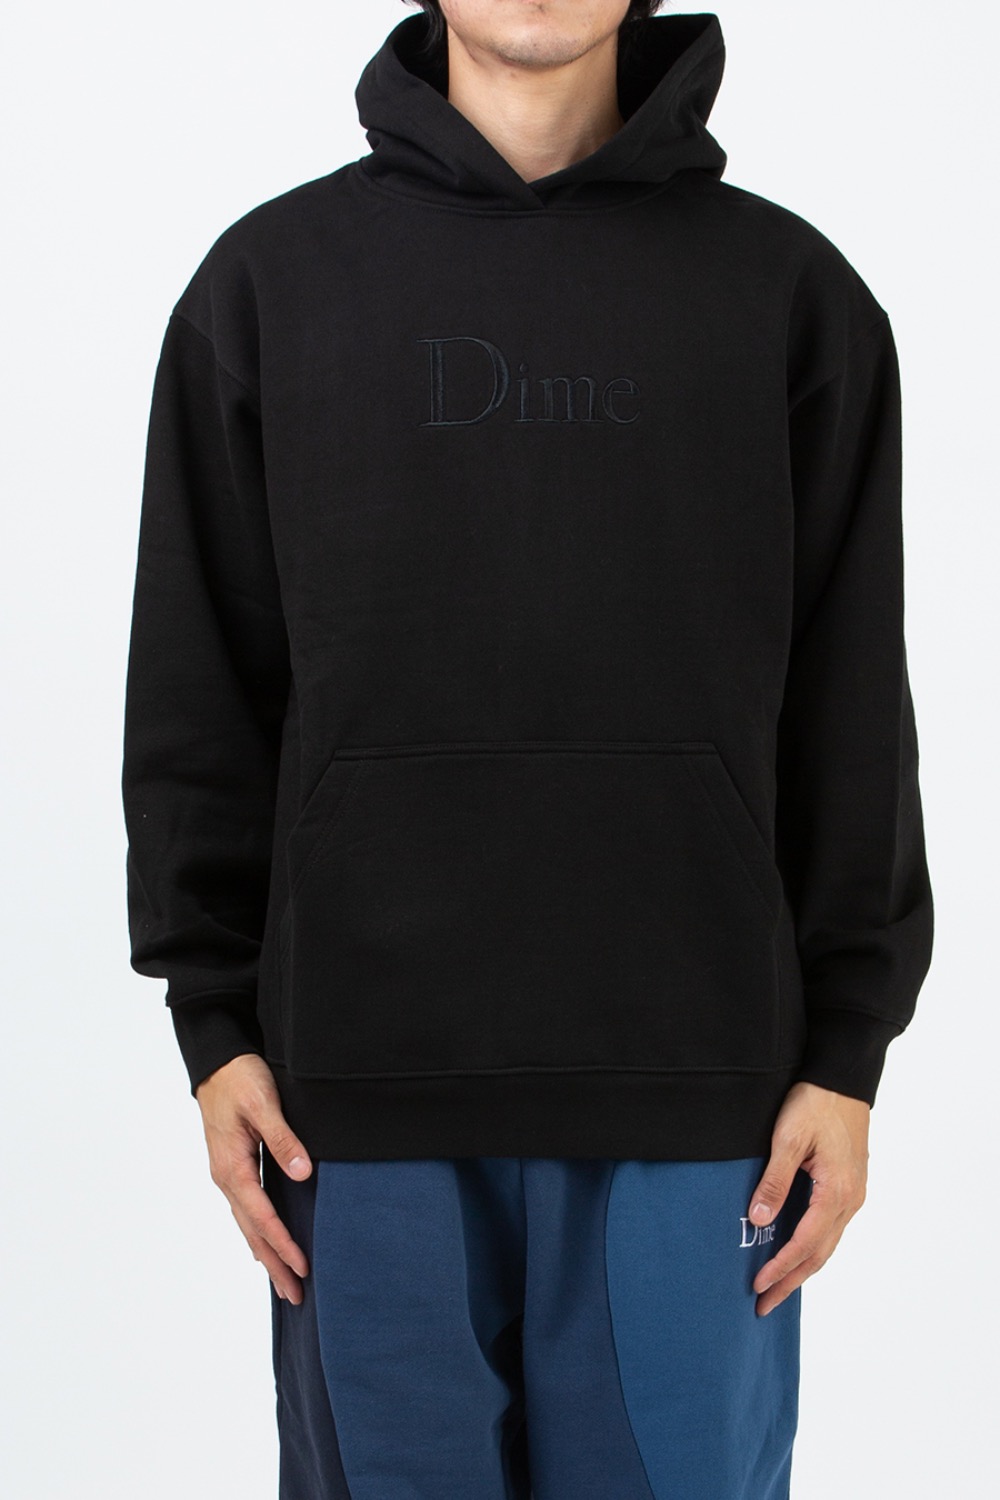 DIME CLASSIC EMBROIDERED HOODIE BLACK